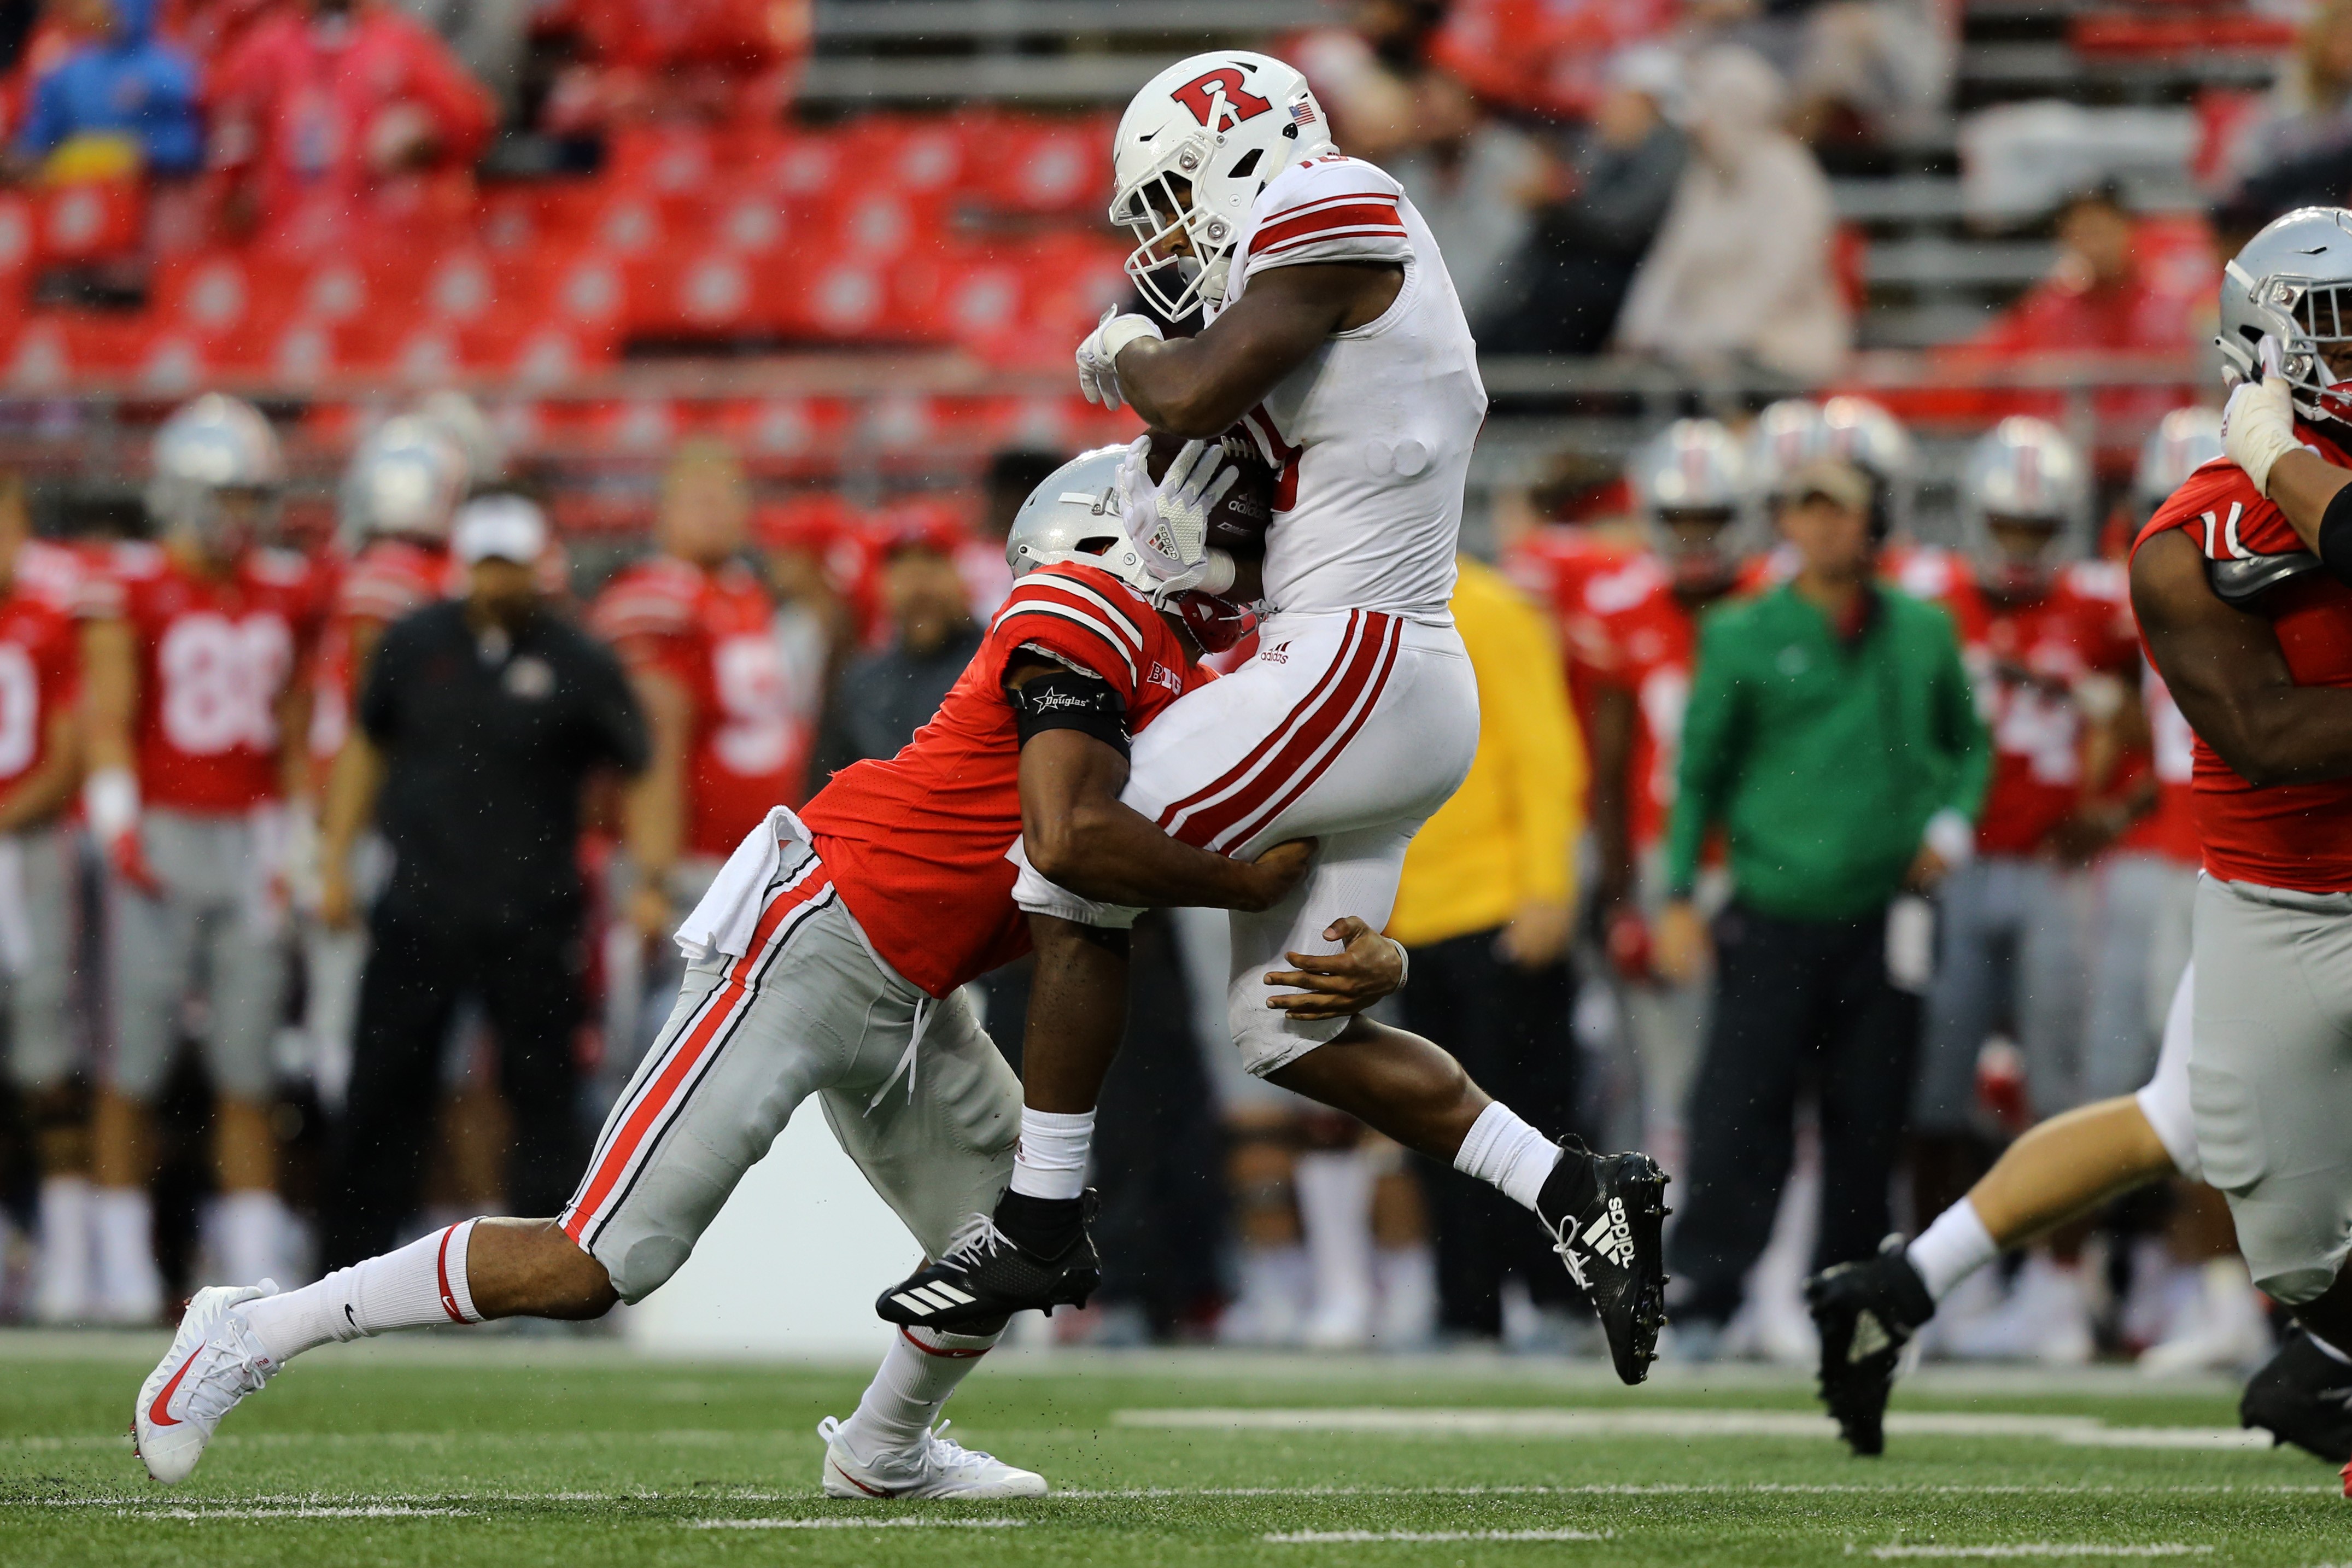 Ohio State football 2020 schedule Ranking the games by difficulty